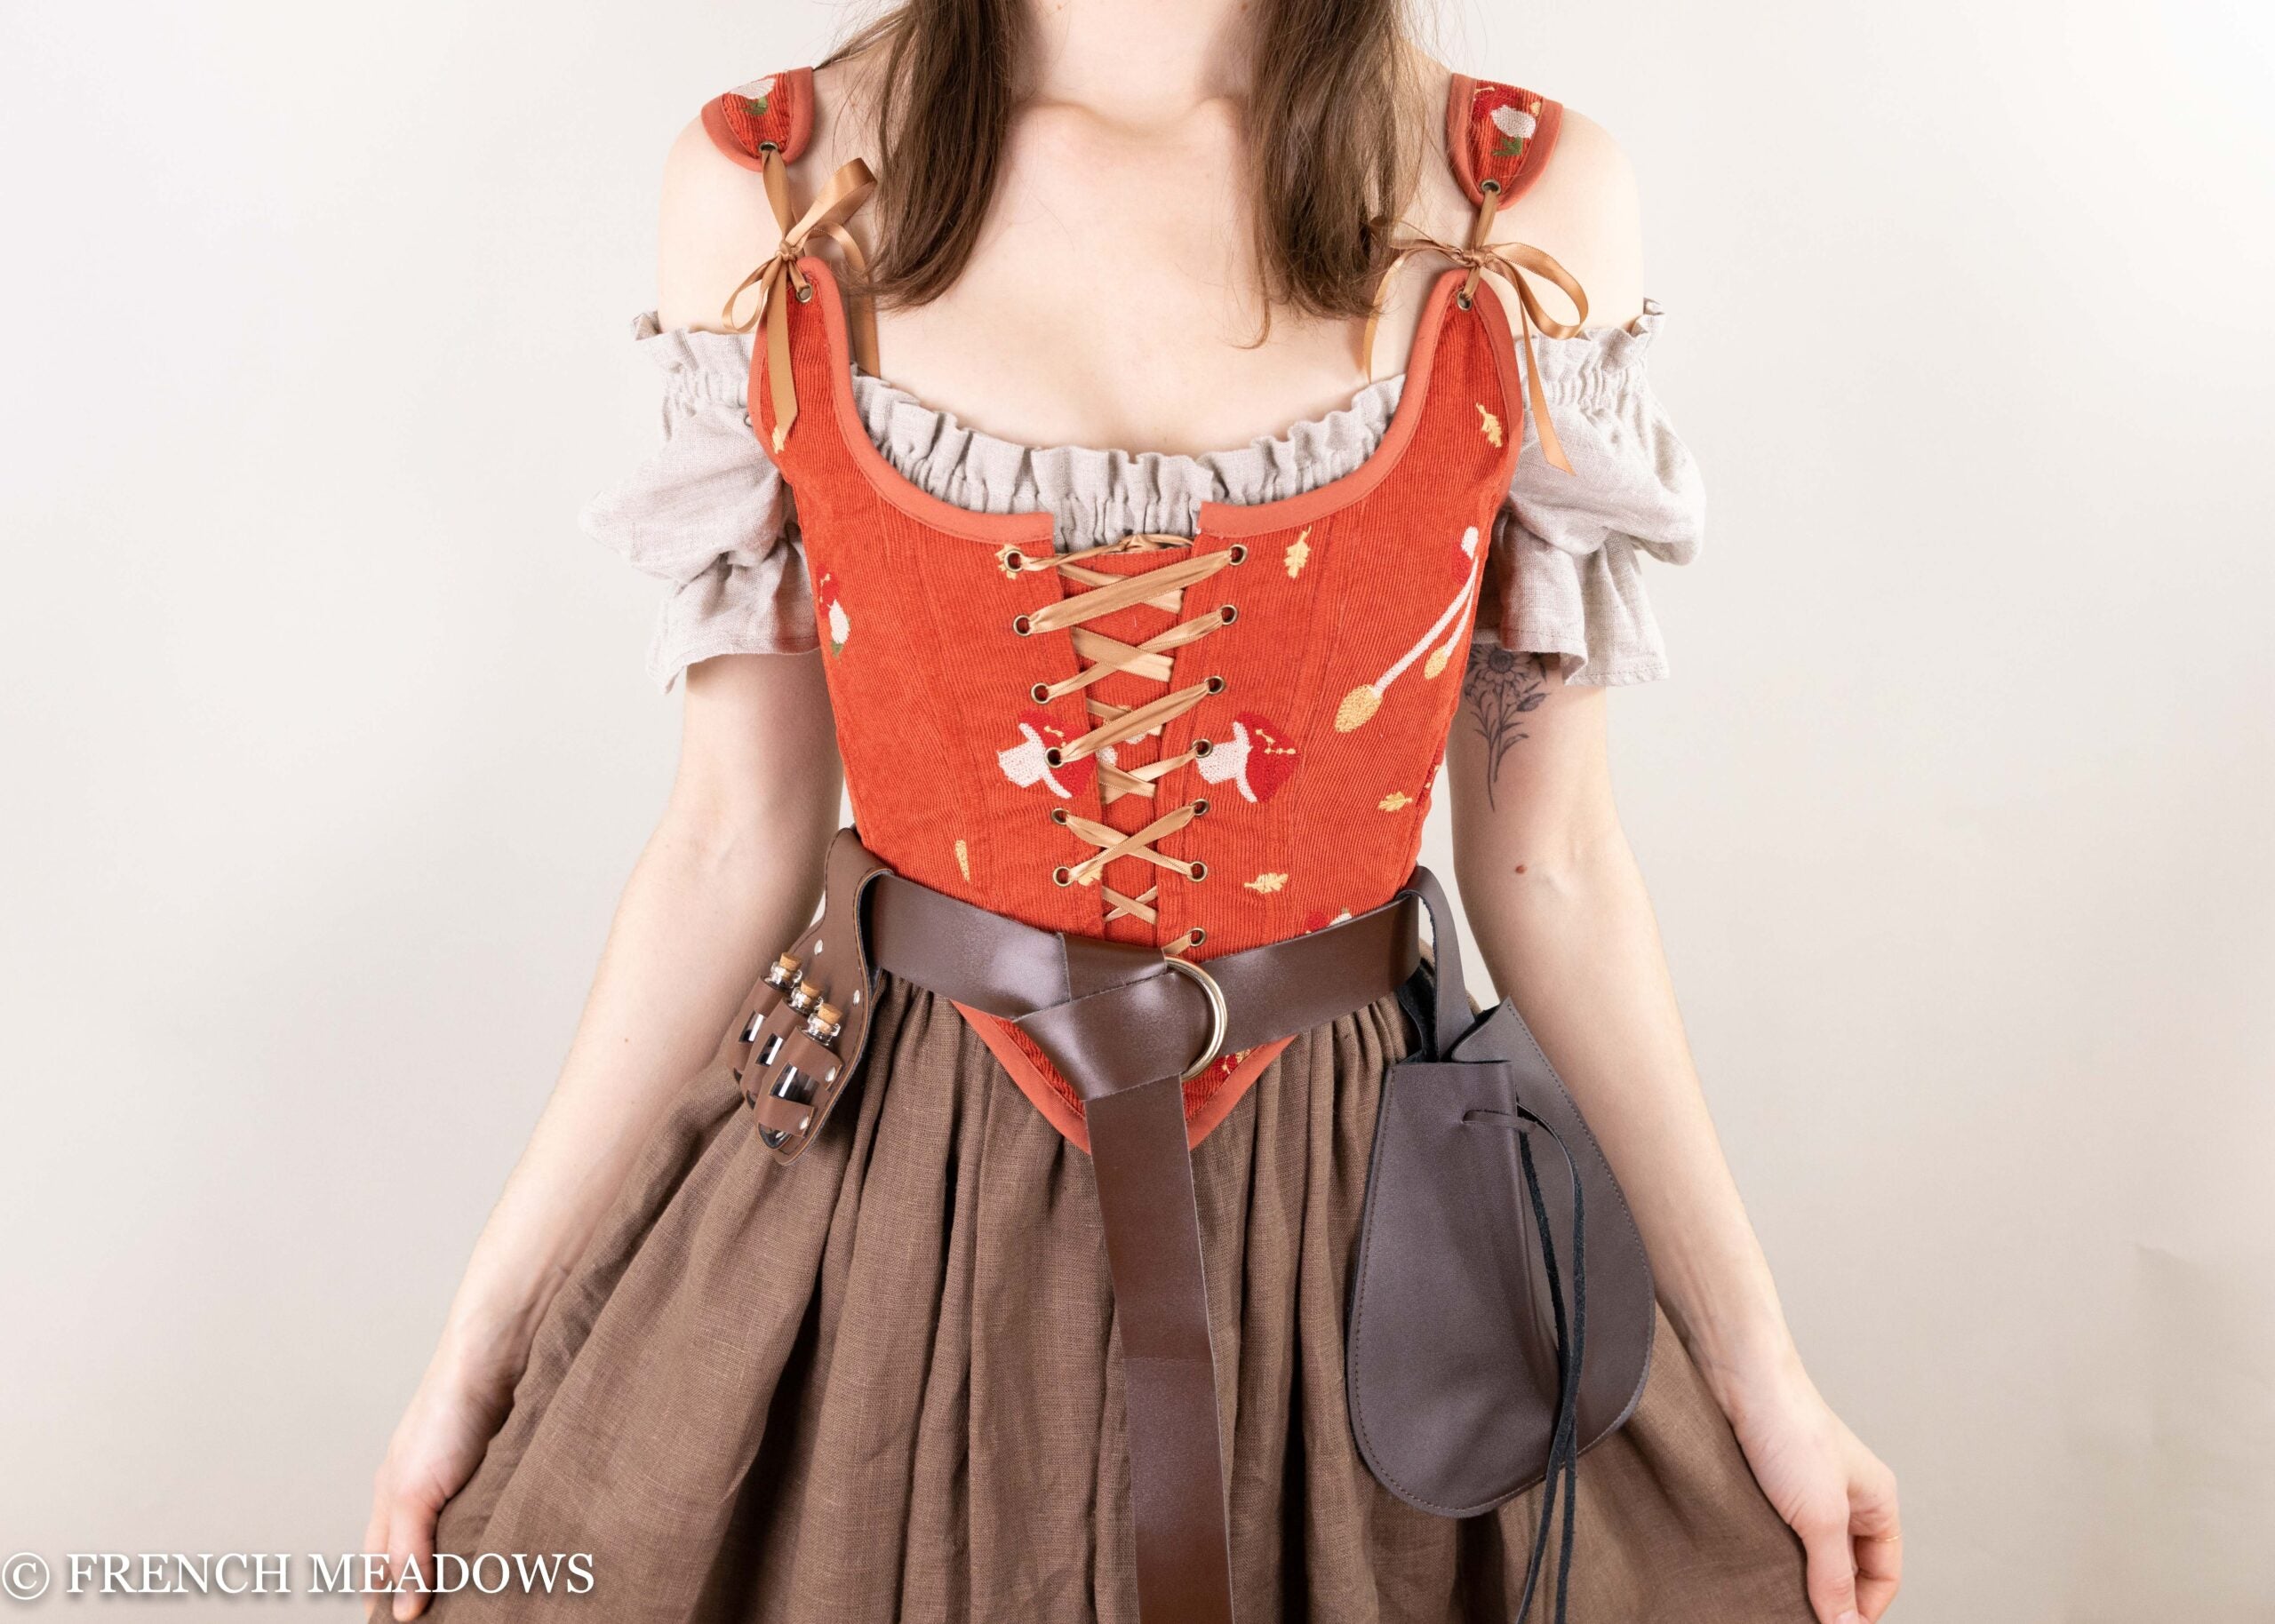 Corsets & Cosplay - Ideas, Images & Pro Tips